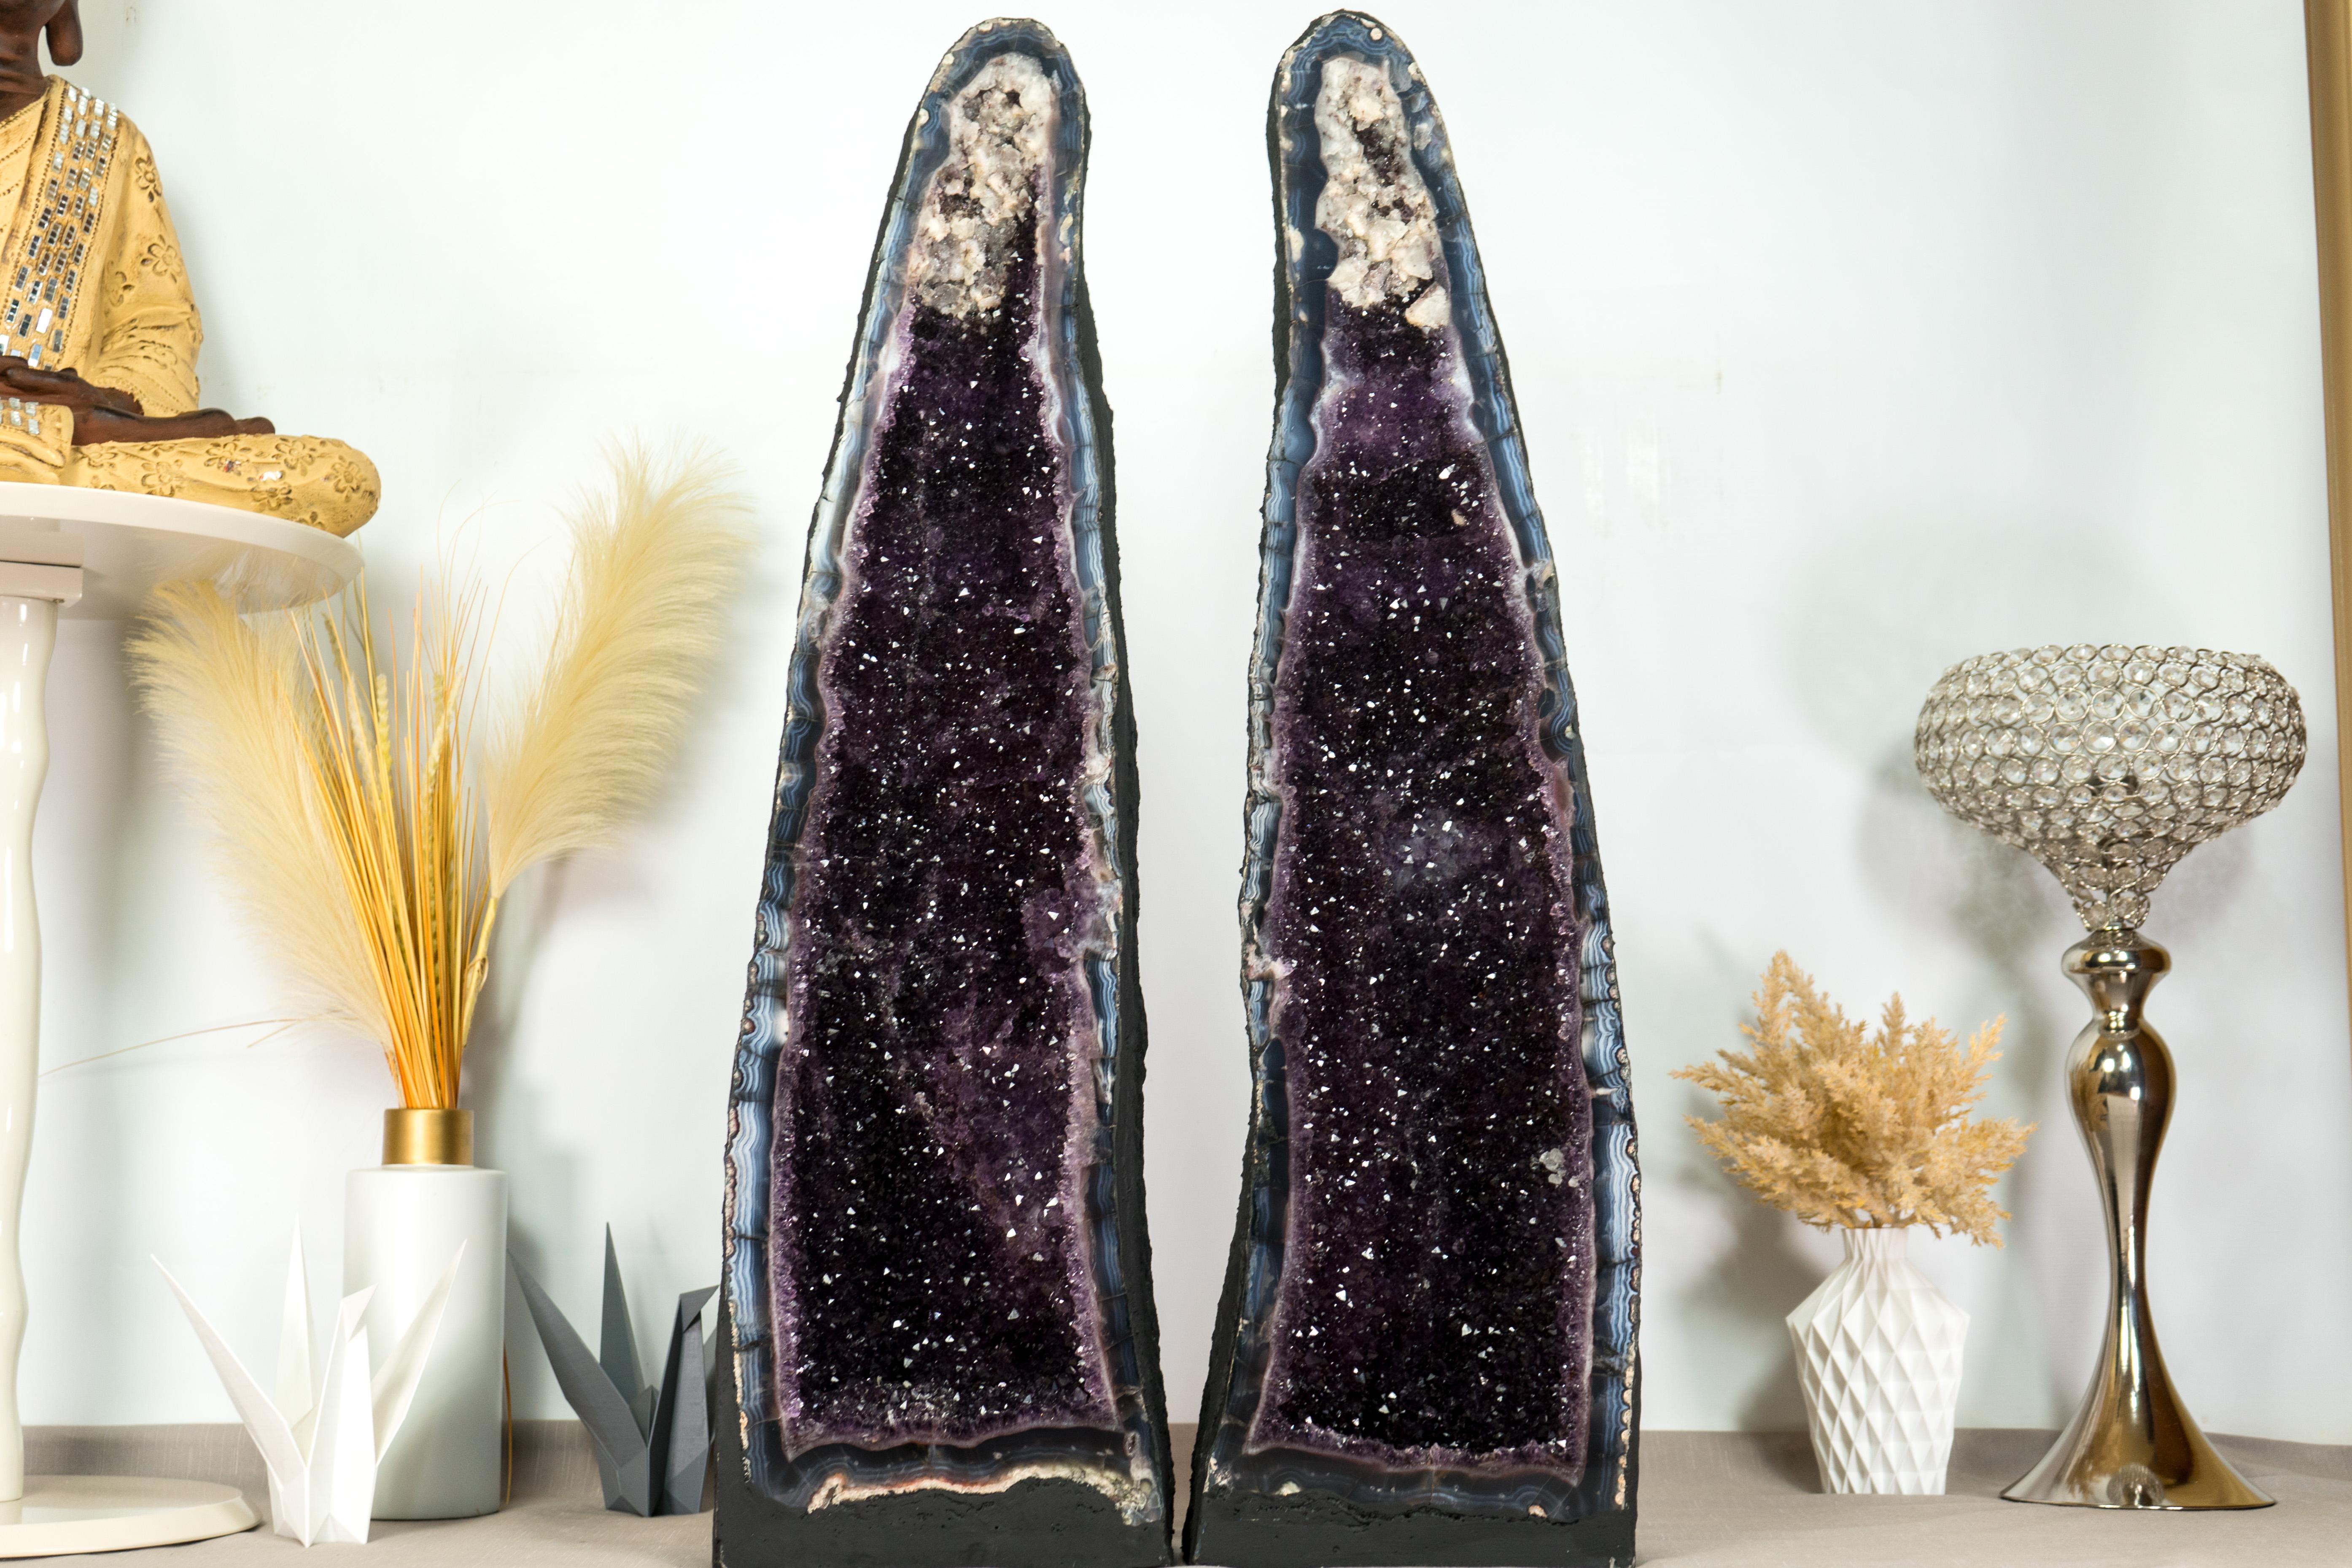 Brazilian Pair of Amethyst Cathedral Geodes, with Lace Agate, Purple Amethyst, and Calcite For Sale